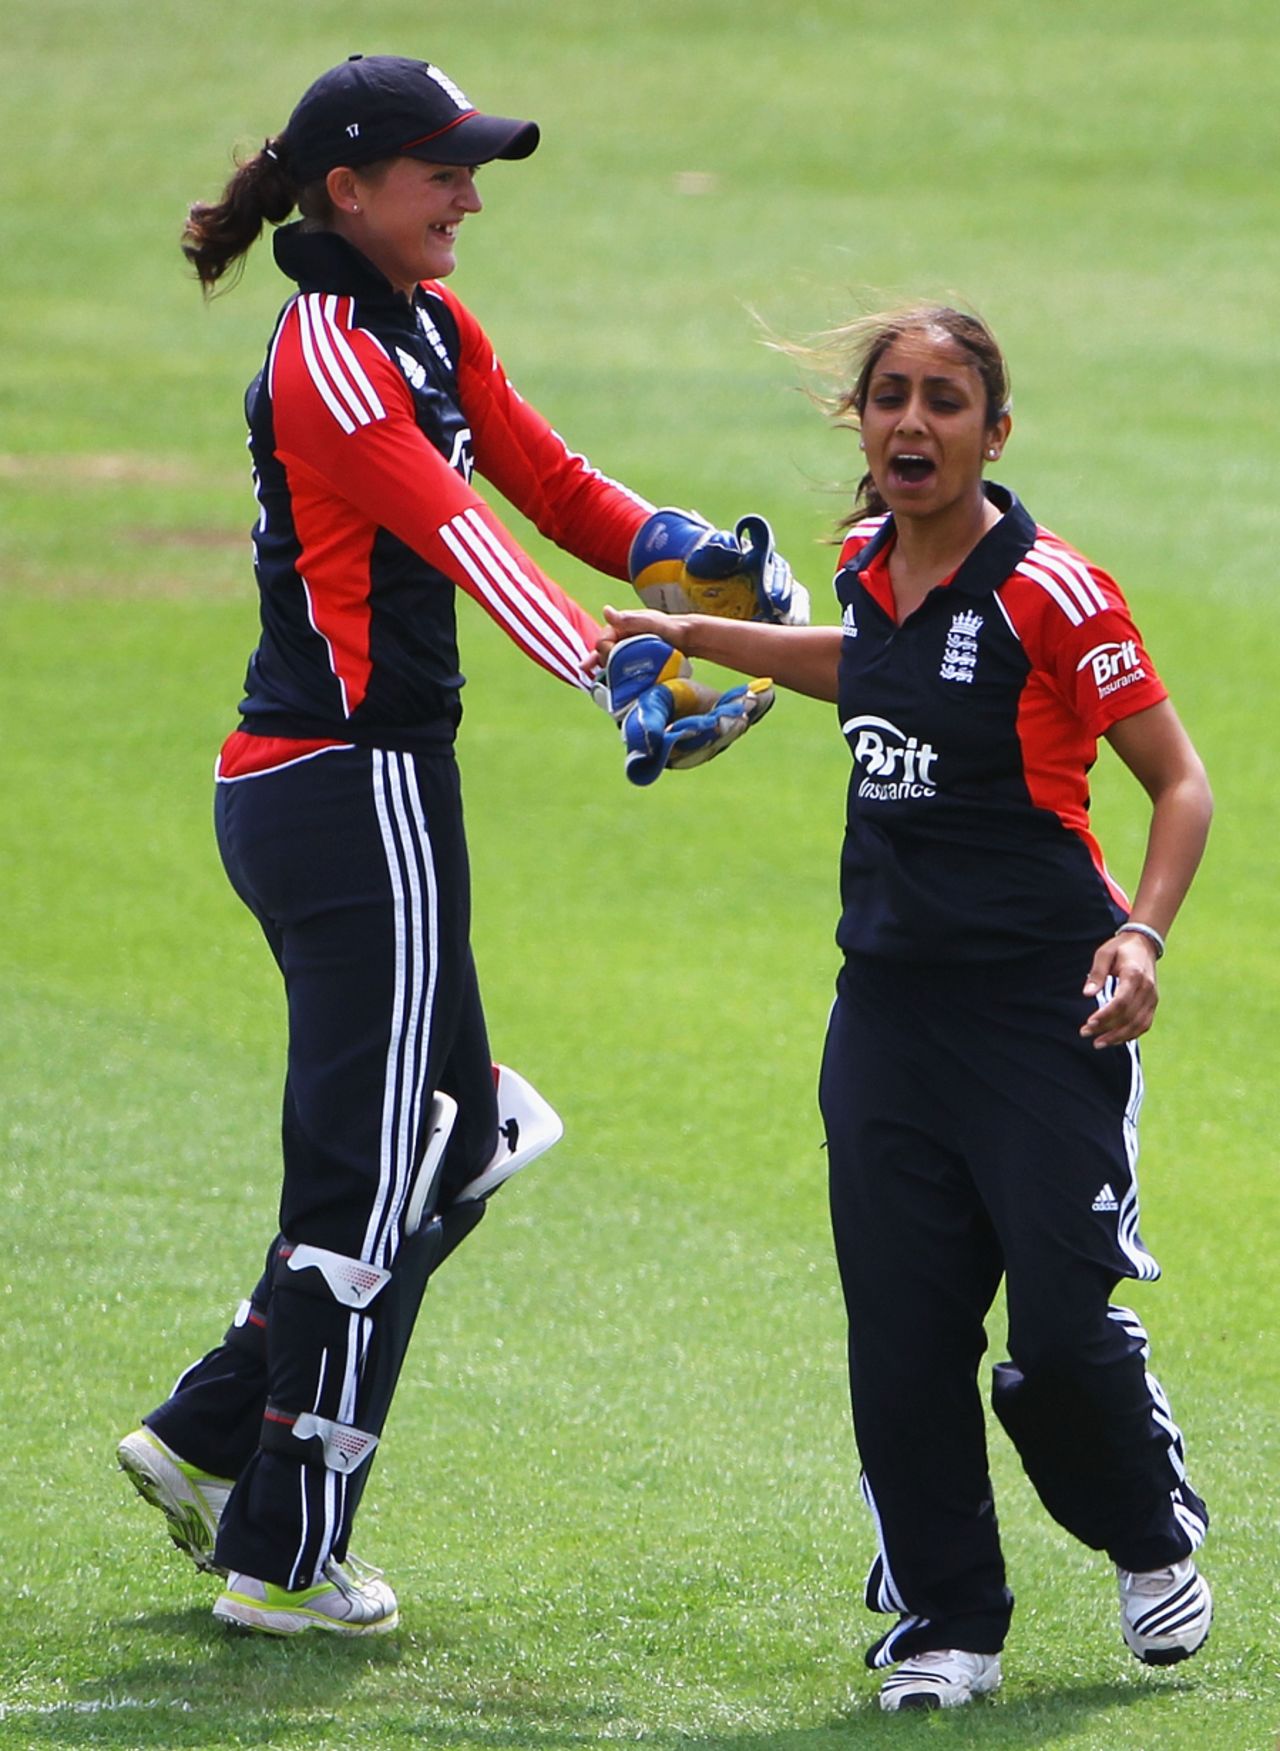 Isa Guha and Sarah Taylor celebrate an early wicket against India, England v India, NatWest Women's Quadrangular Series, Derby, June 30 2011